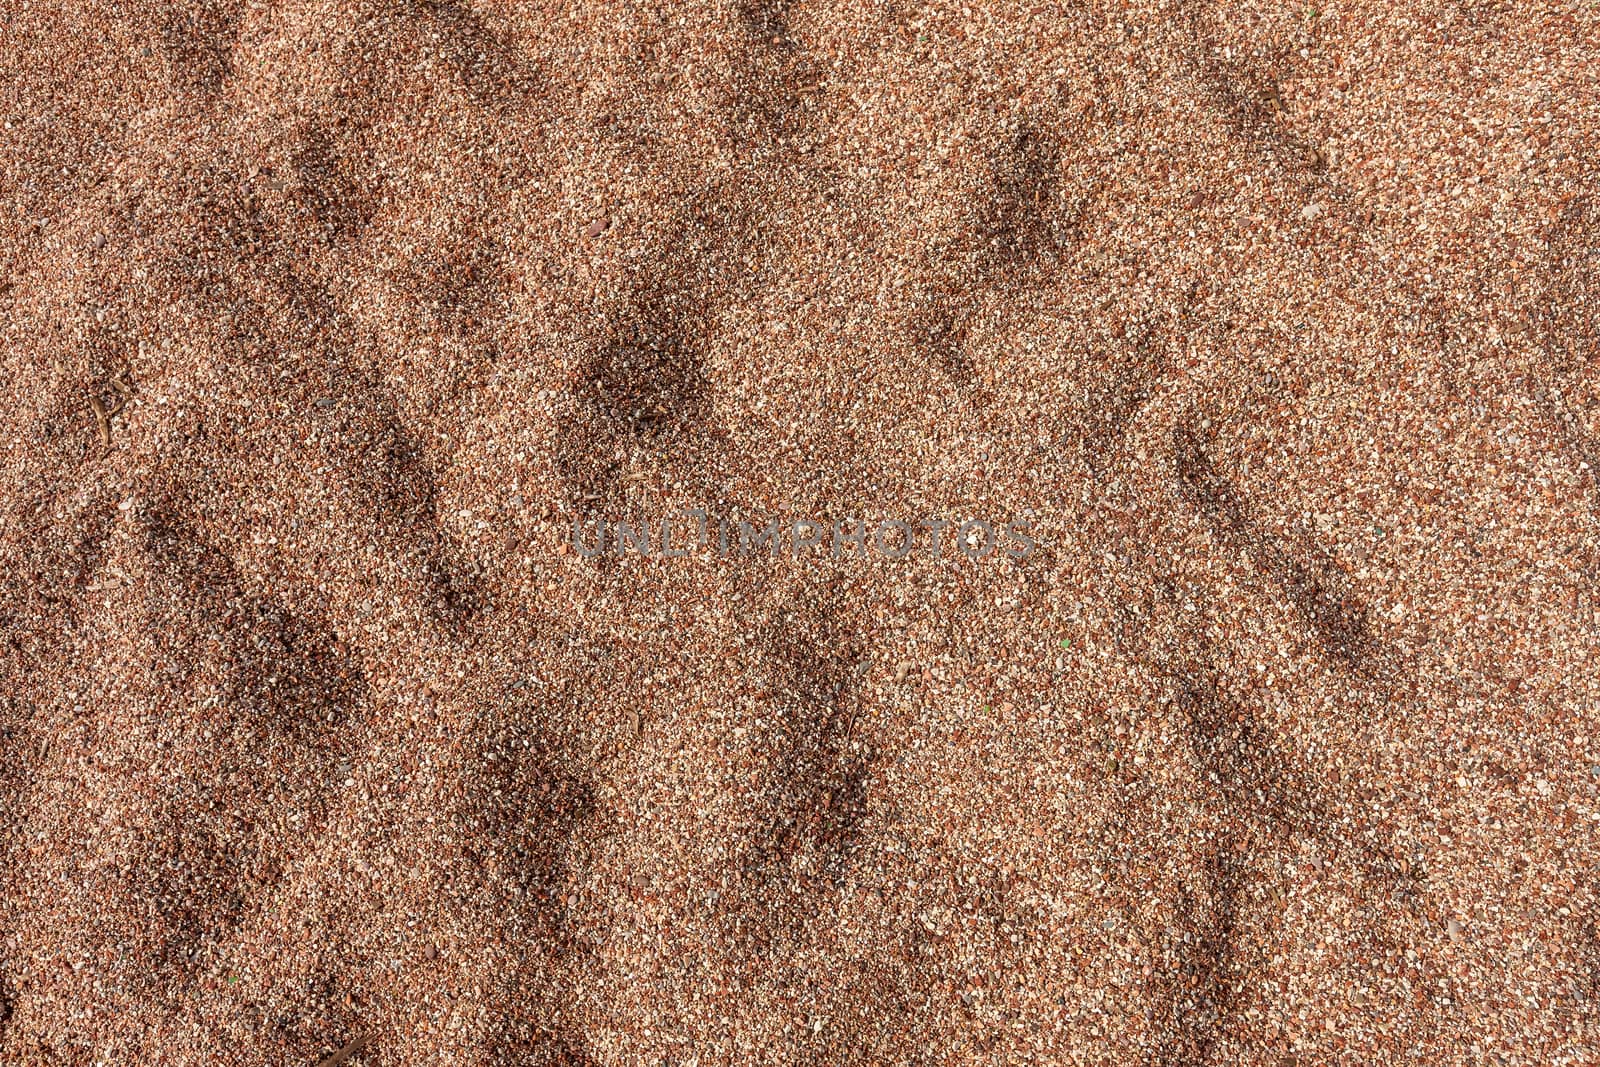 The sand texture from sand pile